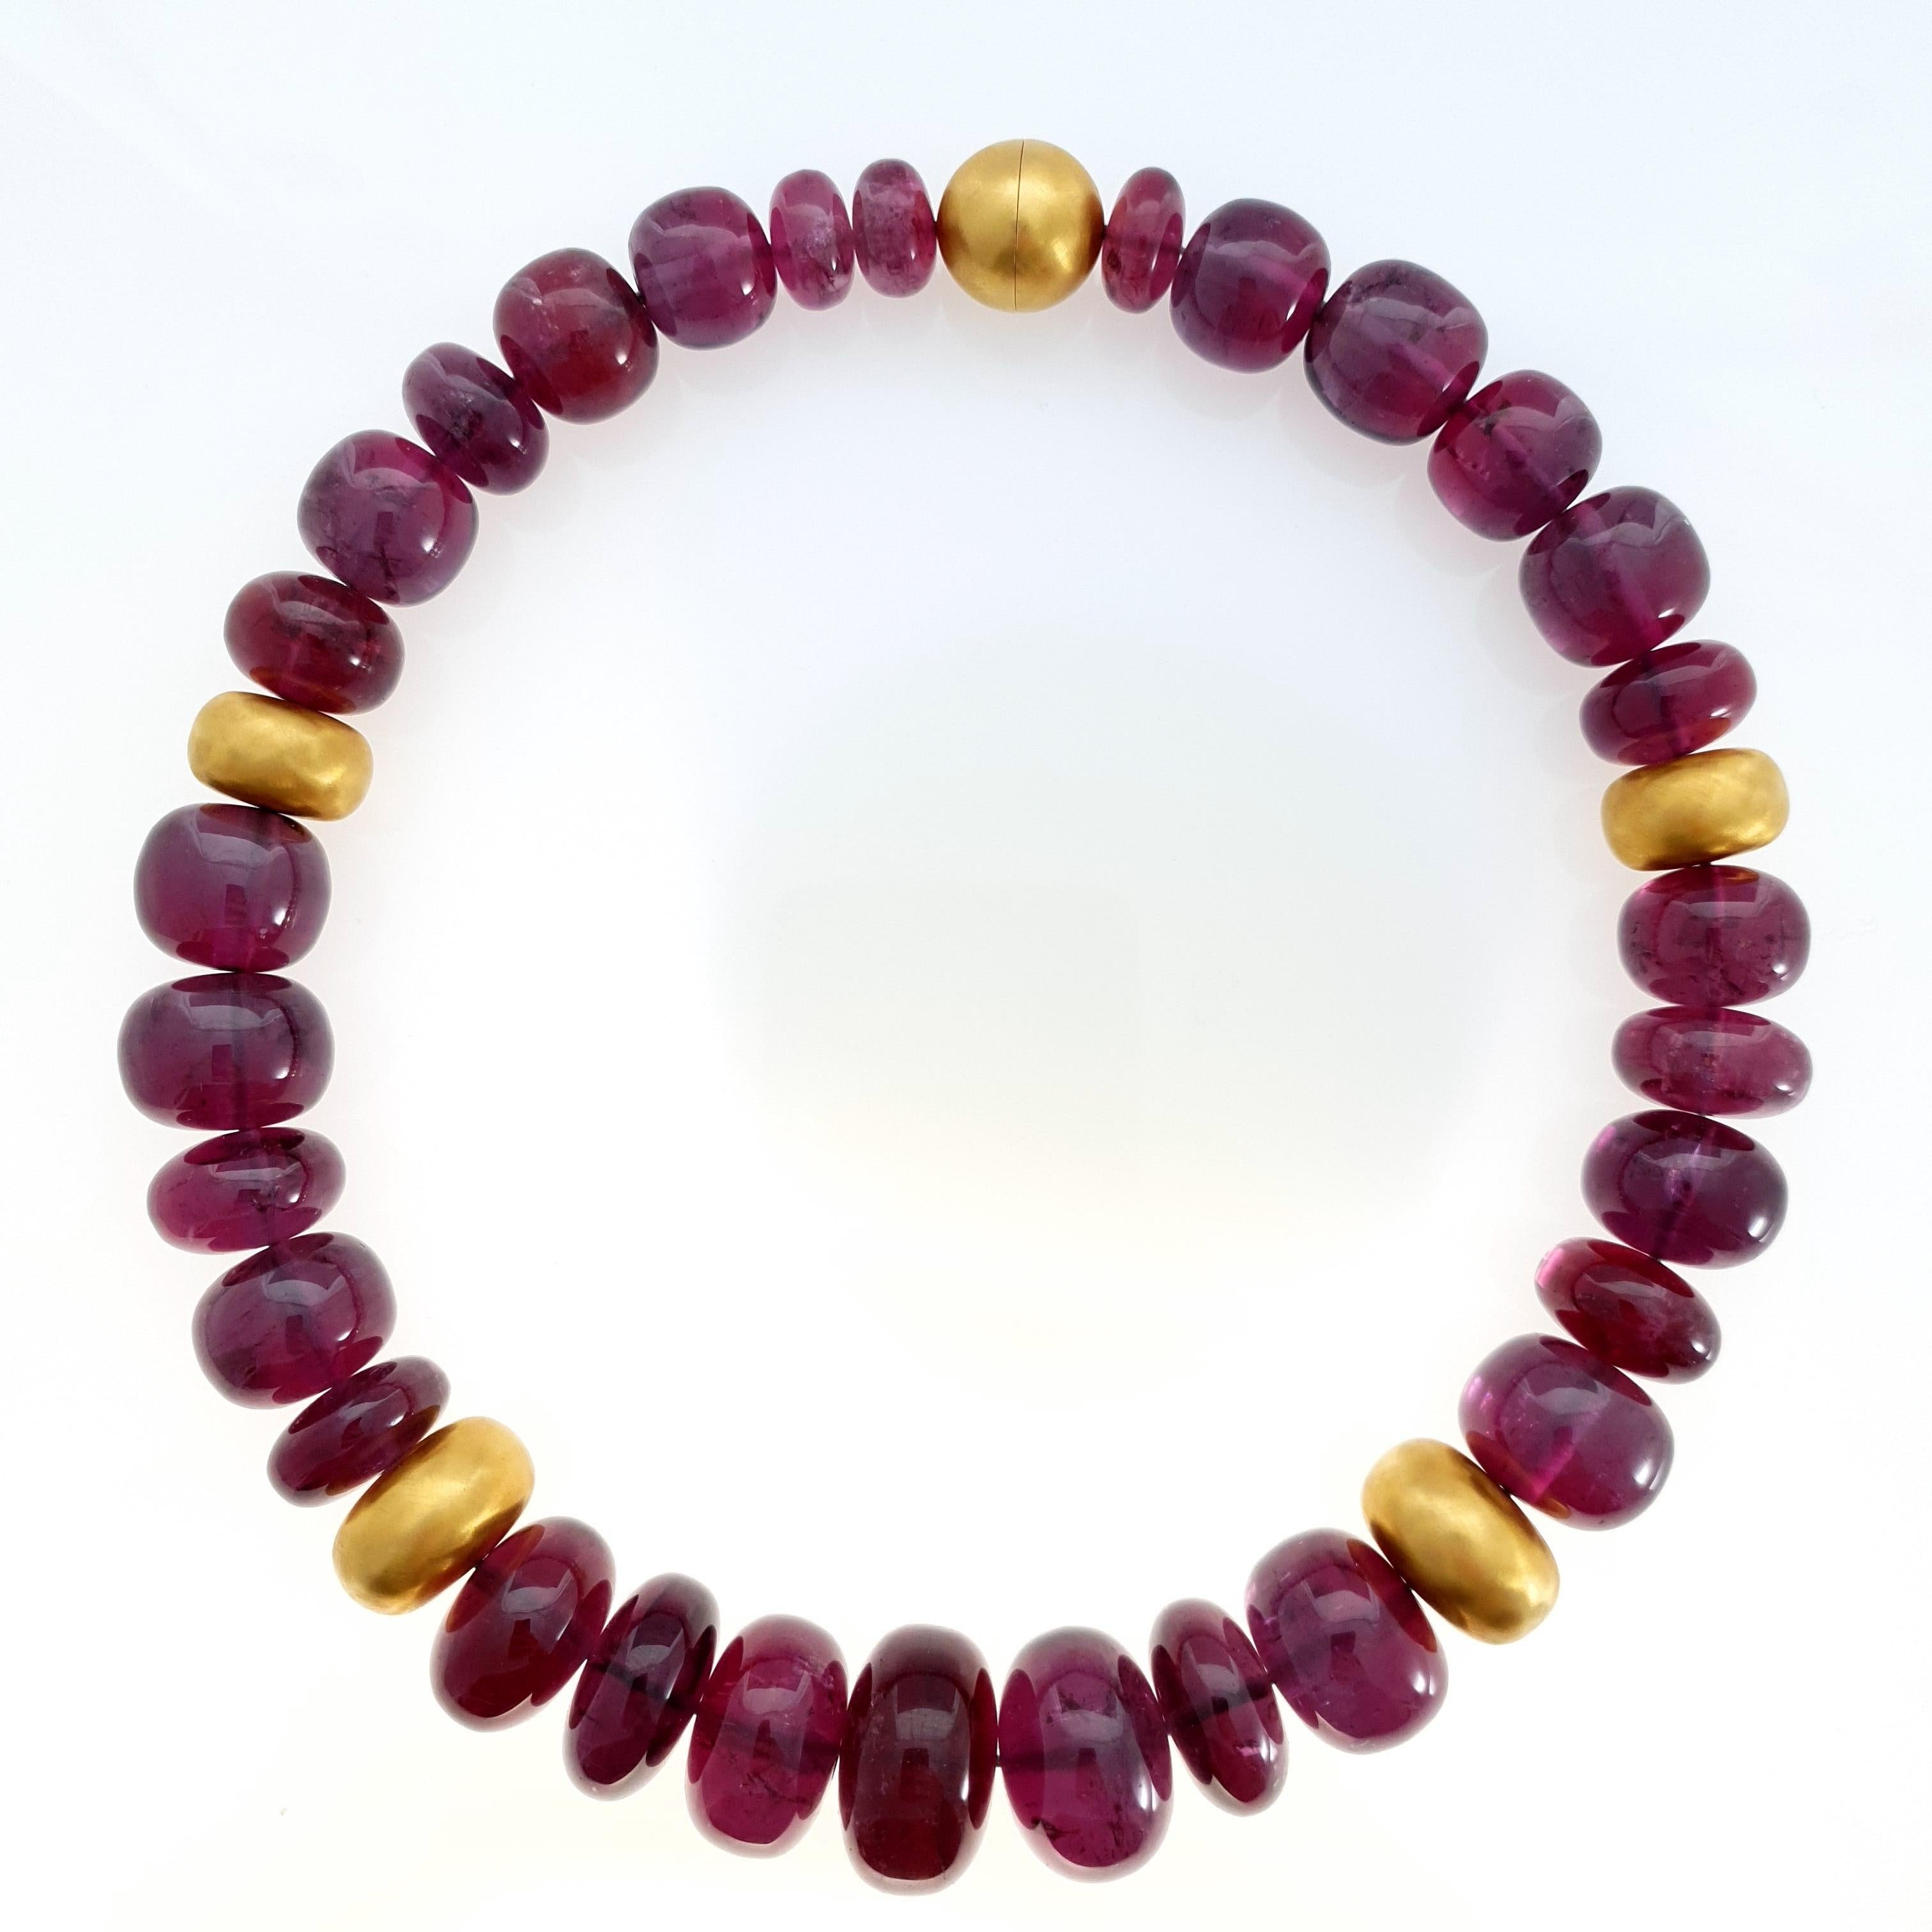 Big Purple Rubelite Tourmaline Rondel Beaded Necklace with 18 Carat Yellow Gold For Sale 3